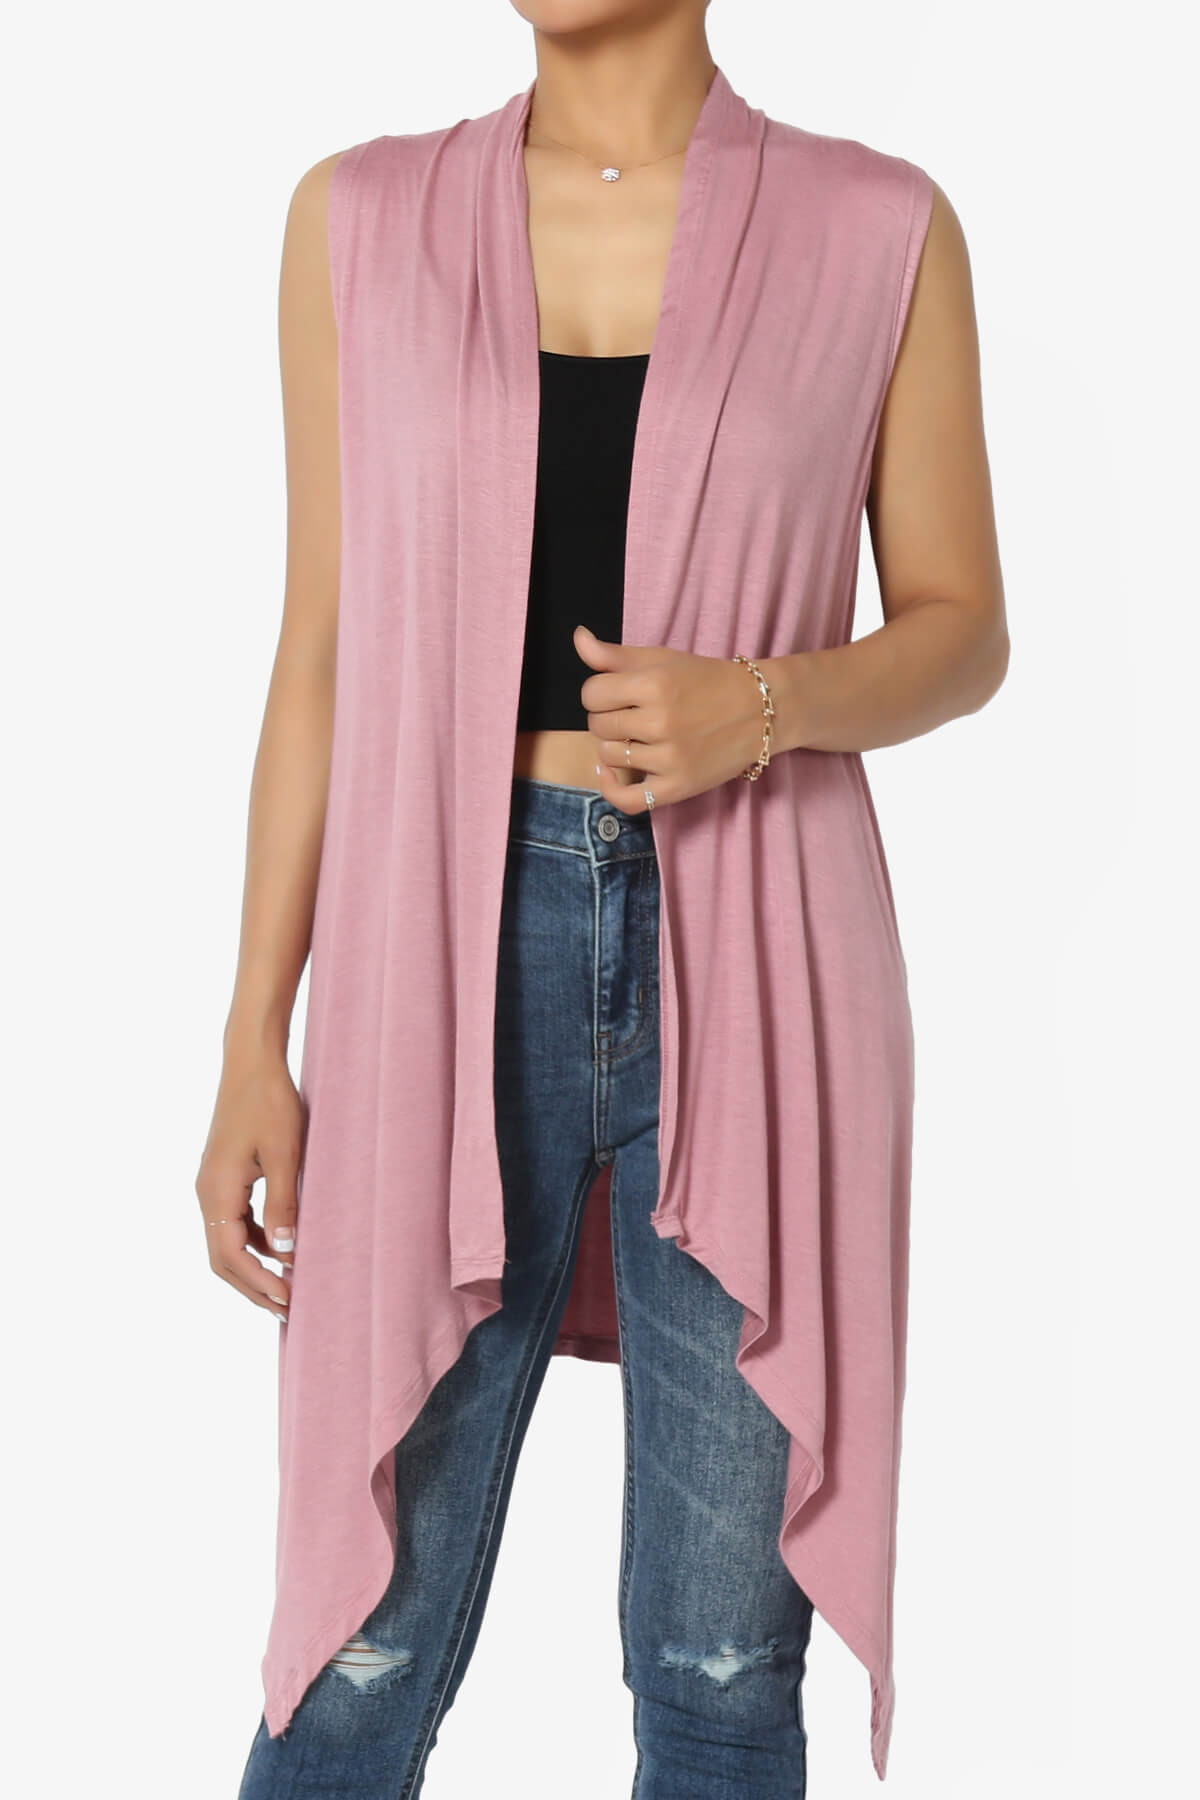 Load image into Gallery viewer, Taysom Draped Open Front Sleeveless Cardigan Vest LIGHT ROSE_1
